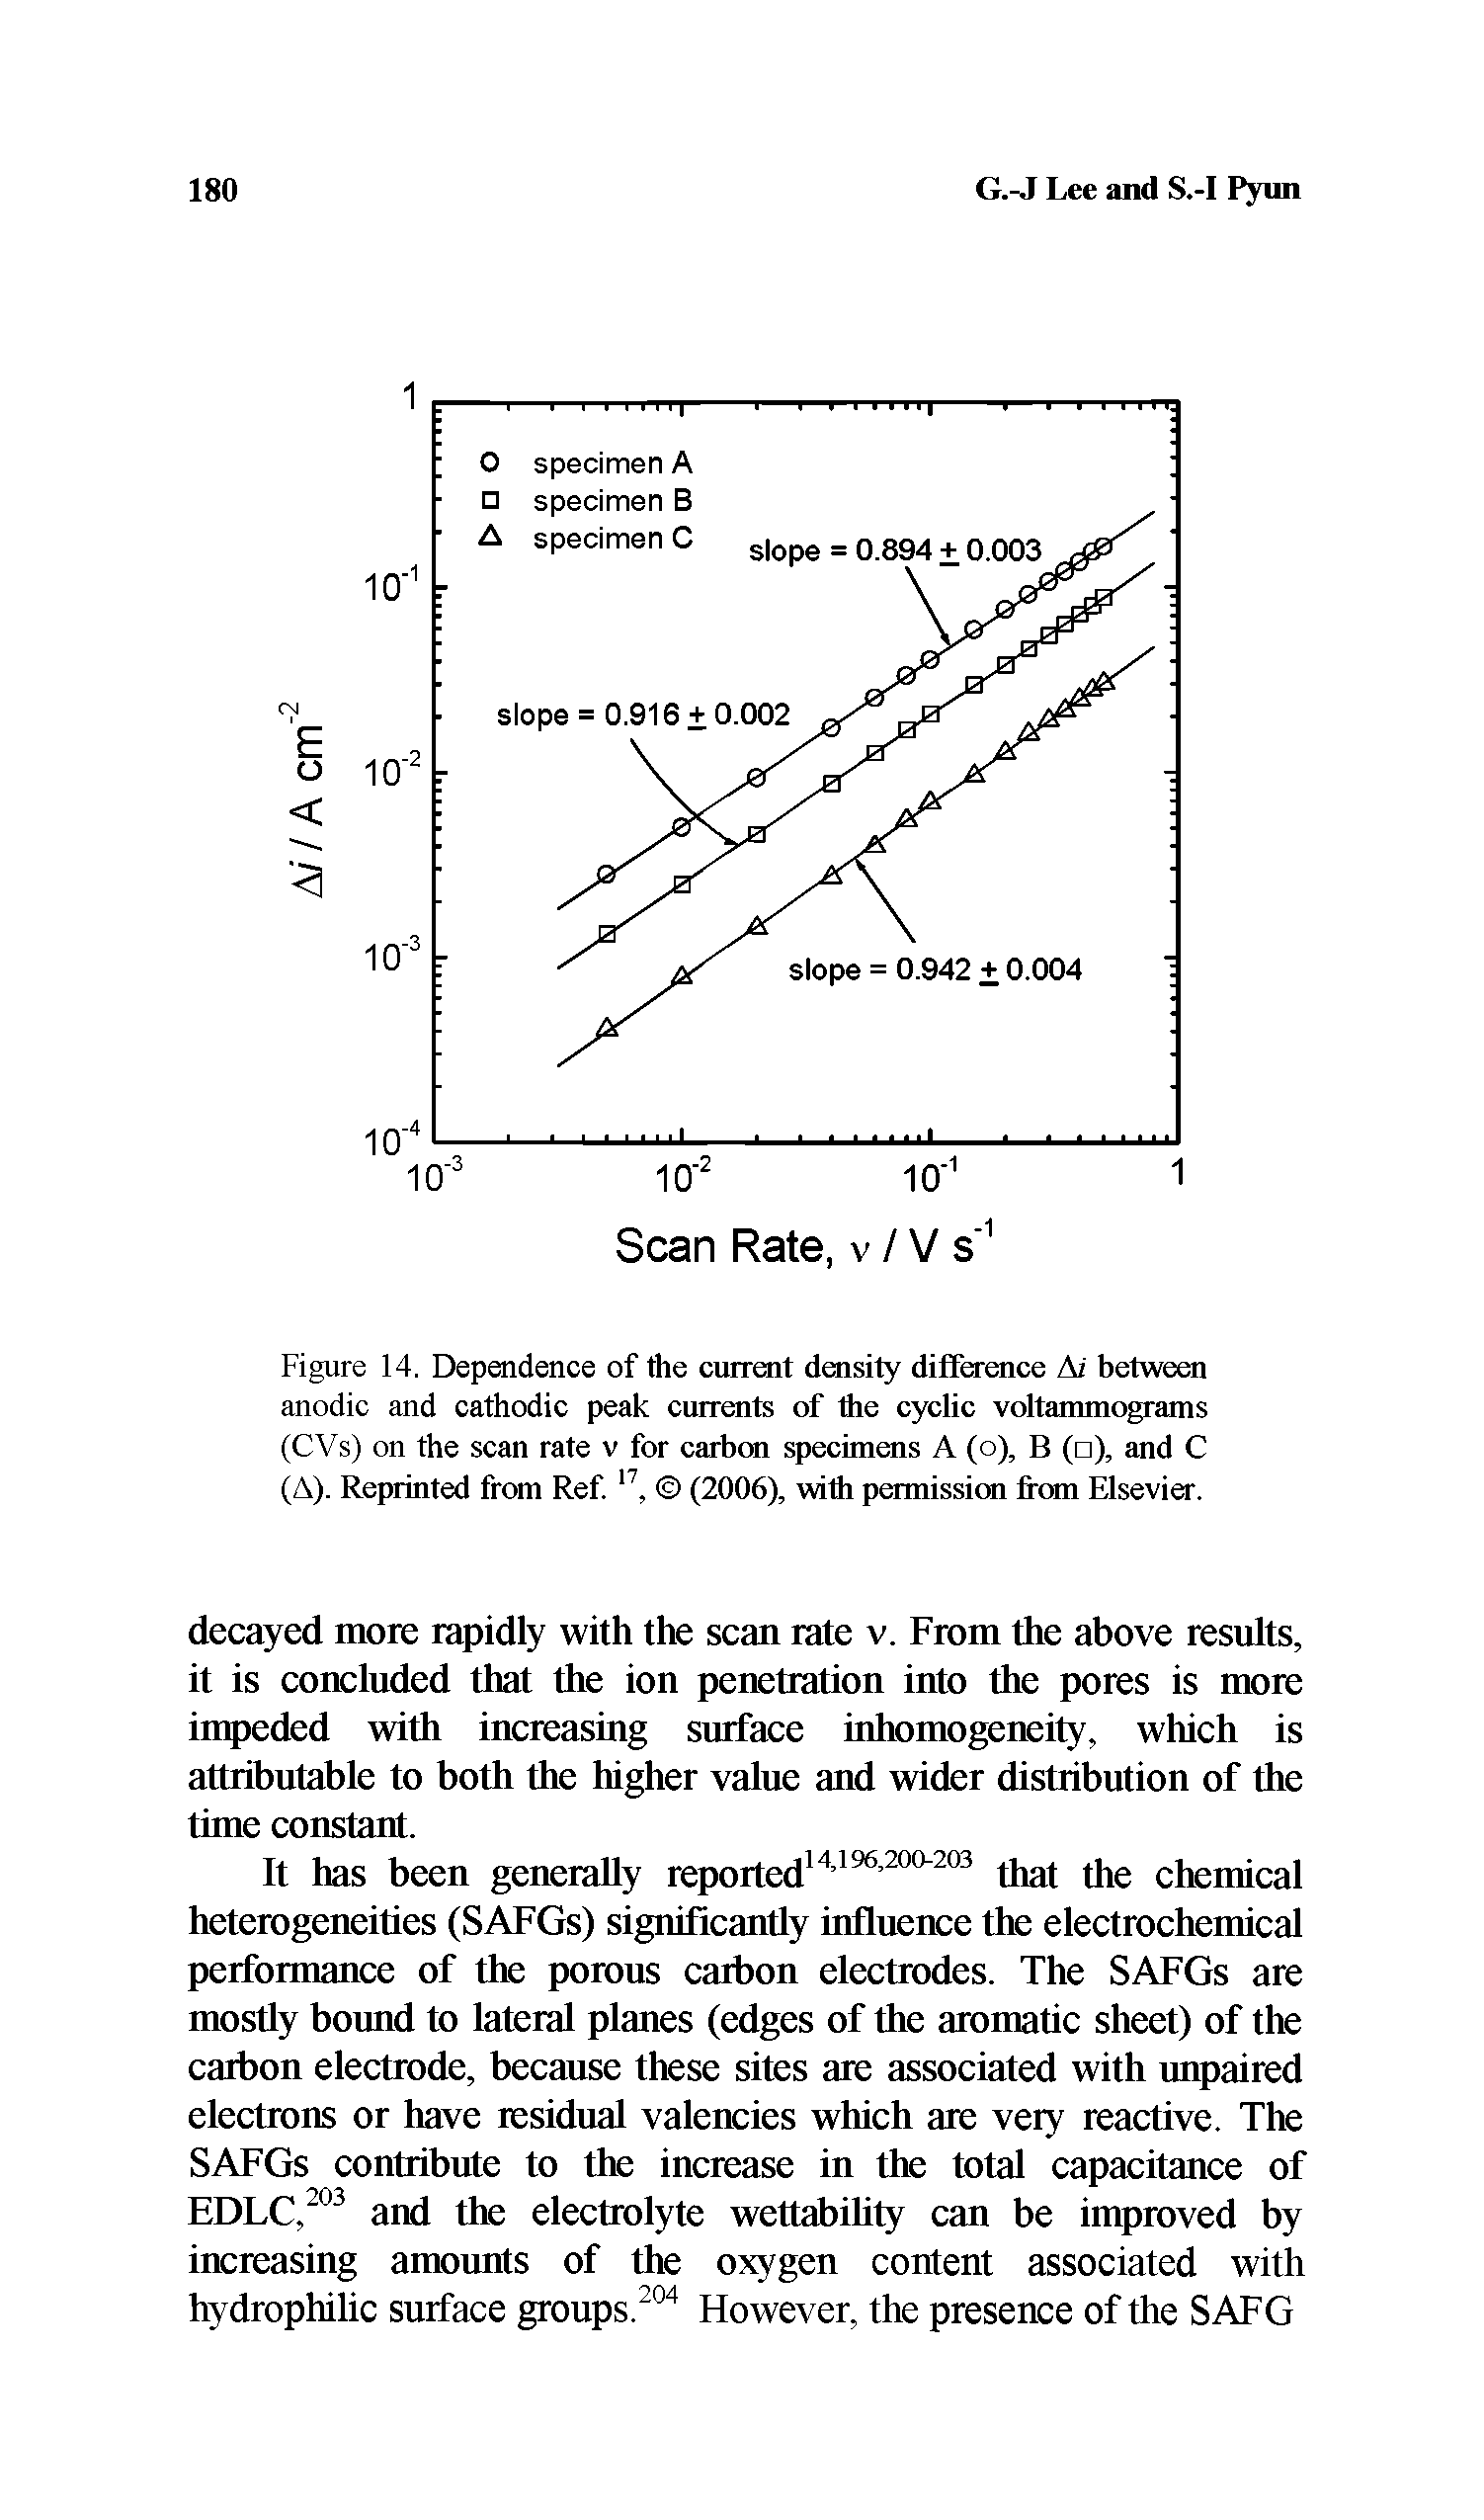 Figure 14. Dependence of the current density difference Ai between anodic and cathodic peak currents of the cyclic voltammograms (CVs) on the scan rate v for carbon specimens A (o), B ( ), and C (A). Reprinted from Ref. 17, (2006), with permission from Elsevier.